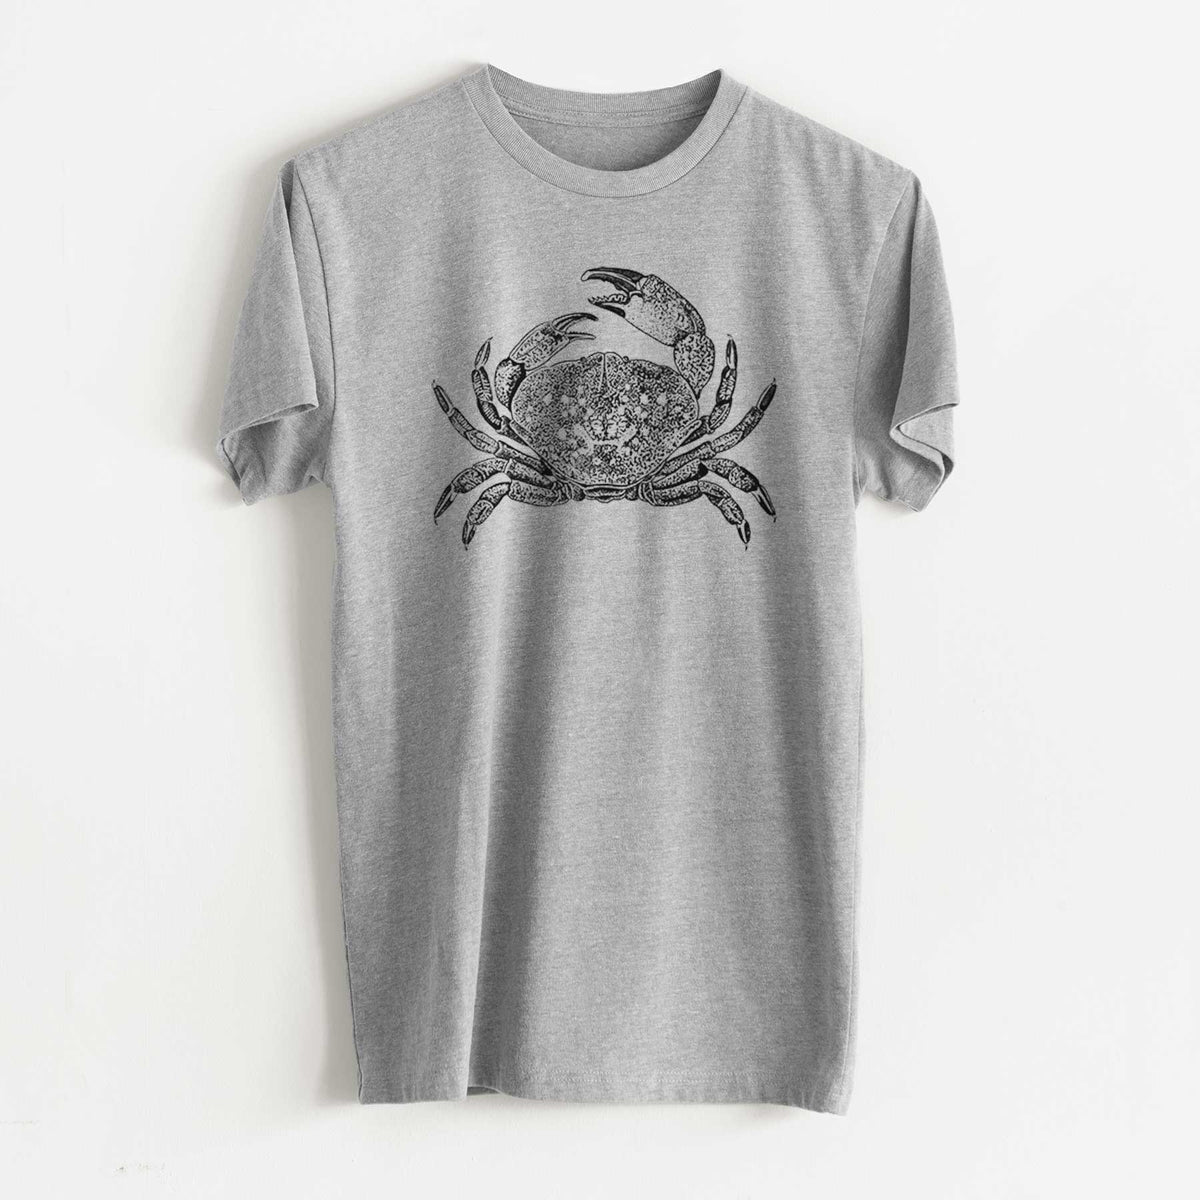 Dungeness Crab - Unisex Recycled Eco Tee  - CLOSEOUT - FINAL SALE